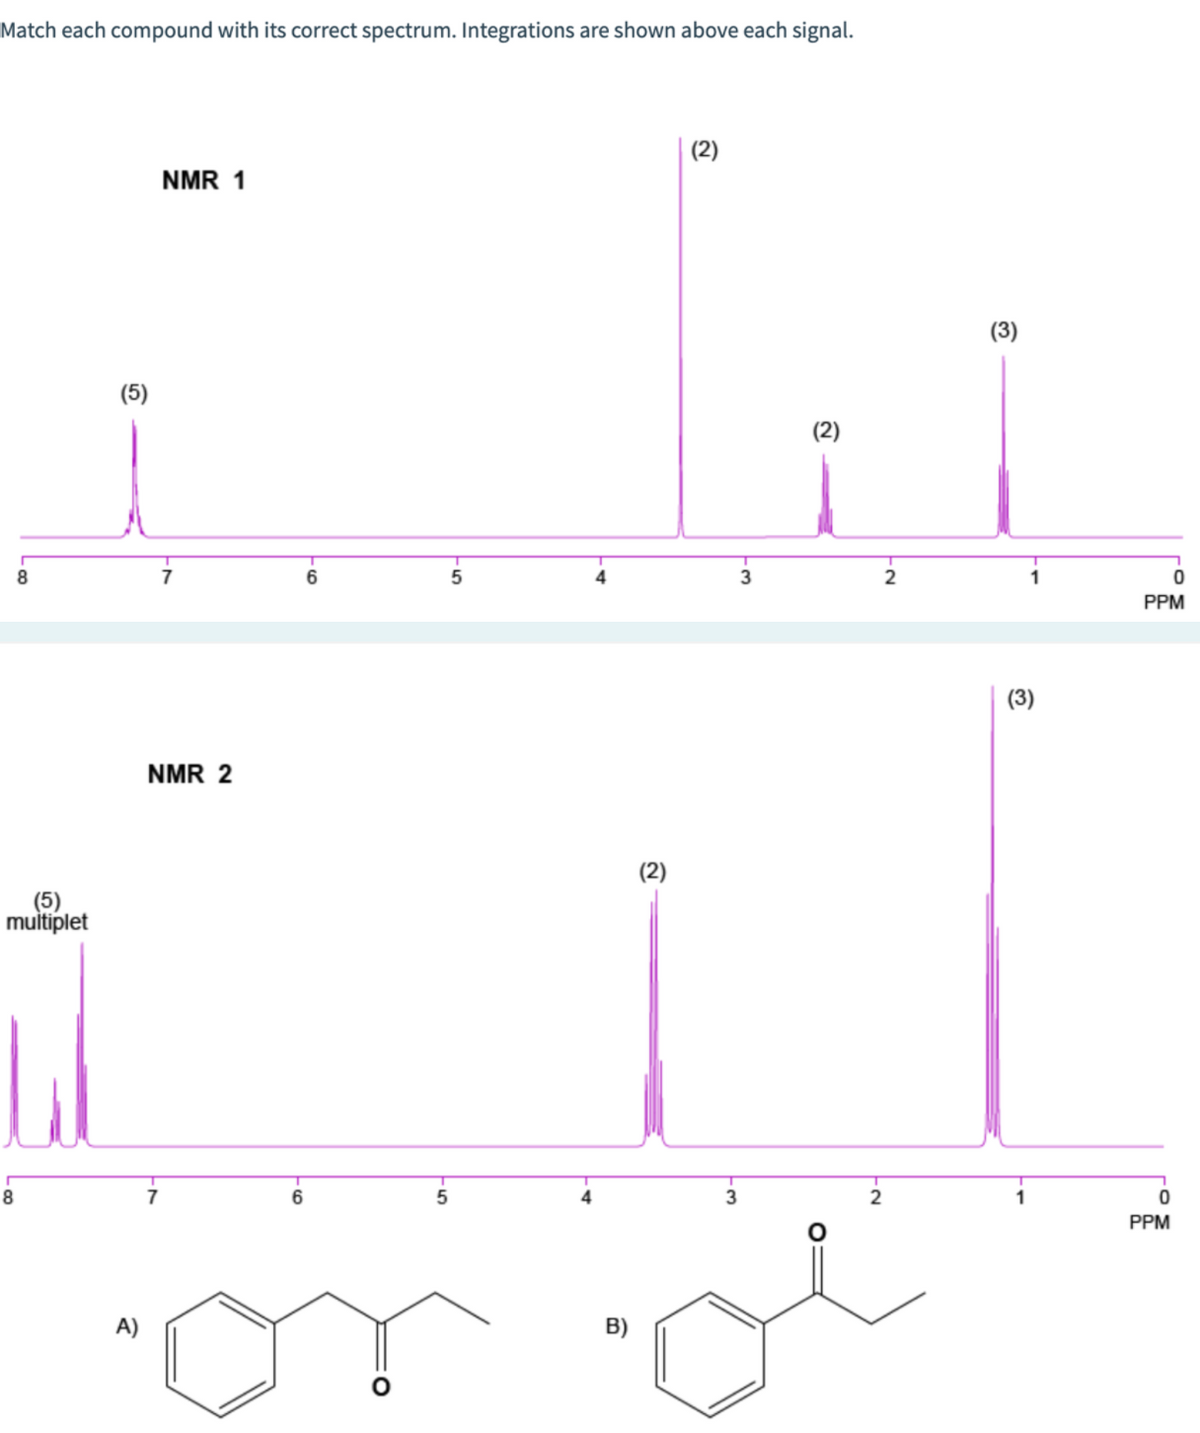 Match each compound with its correct spectrum. Integrations are shown above each signal.
(2)
NMR 1
(3)
(5)
(2)
PPM
(3)
NMR 2
(2)
(5)
muitiplet
8
7
6.
5
2
PPM
A)
B)
-3-
